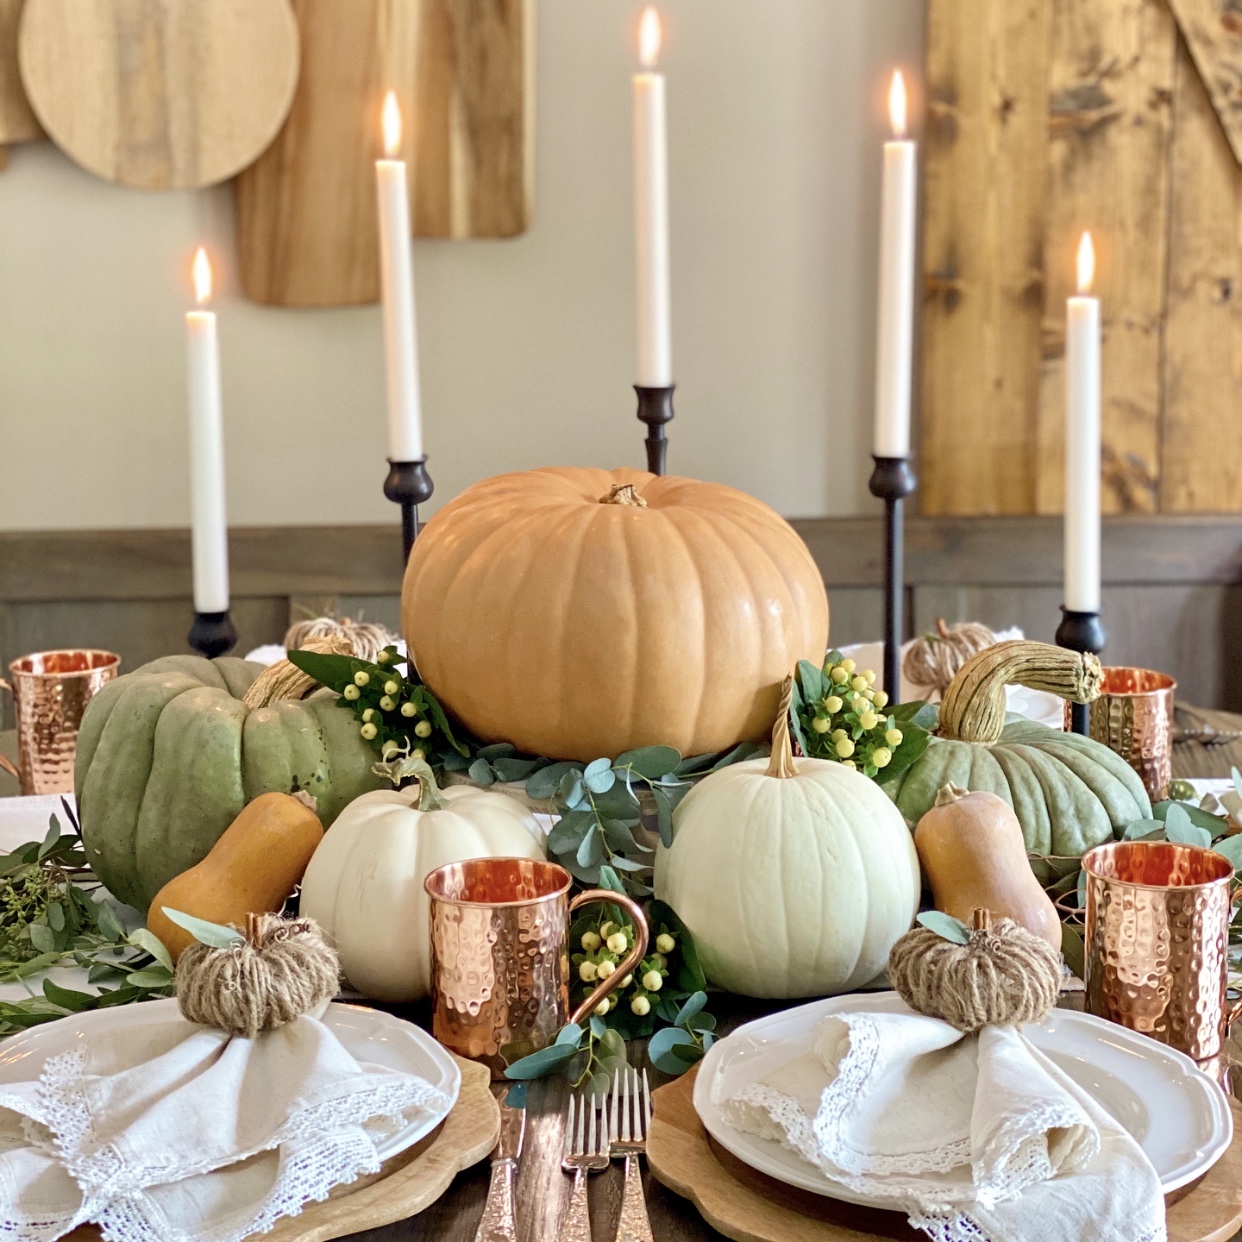 A table set for Fall with a pumpkin centerpiece, candles in black holders, and linen napkins on plates with twine pumpkin rings on them.